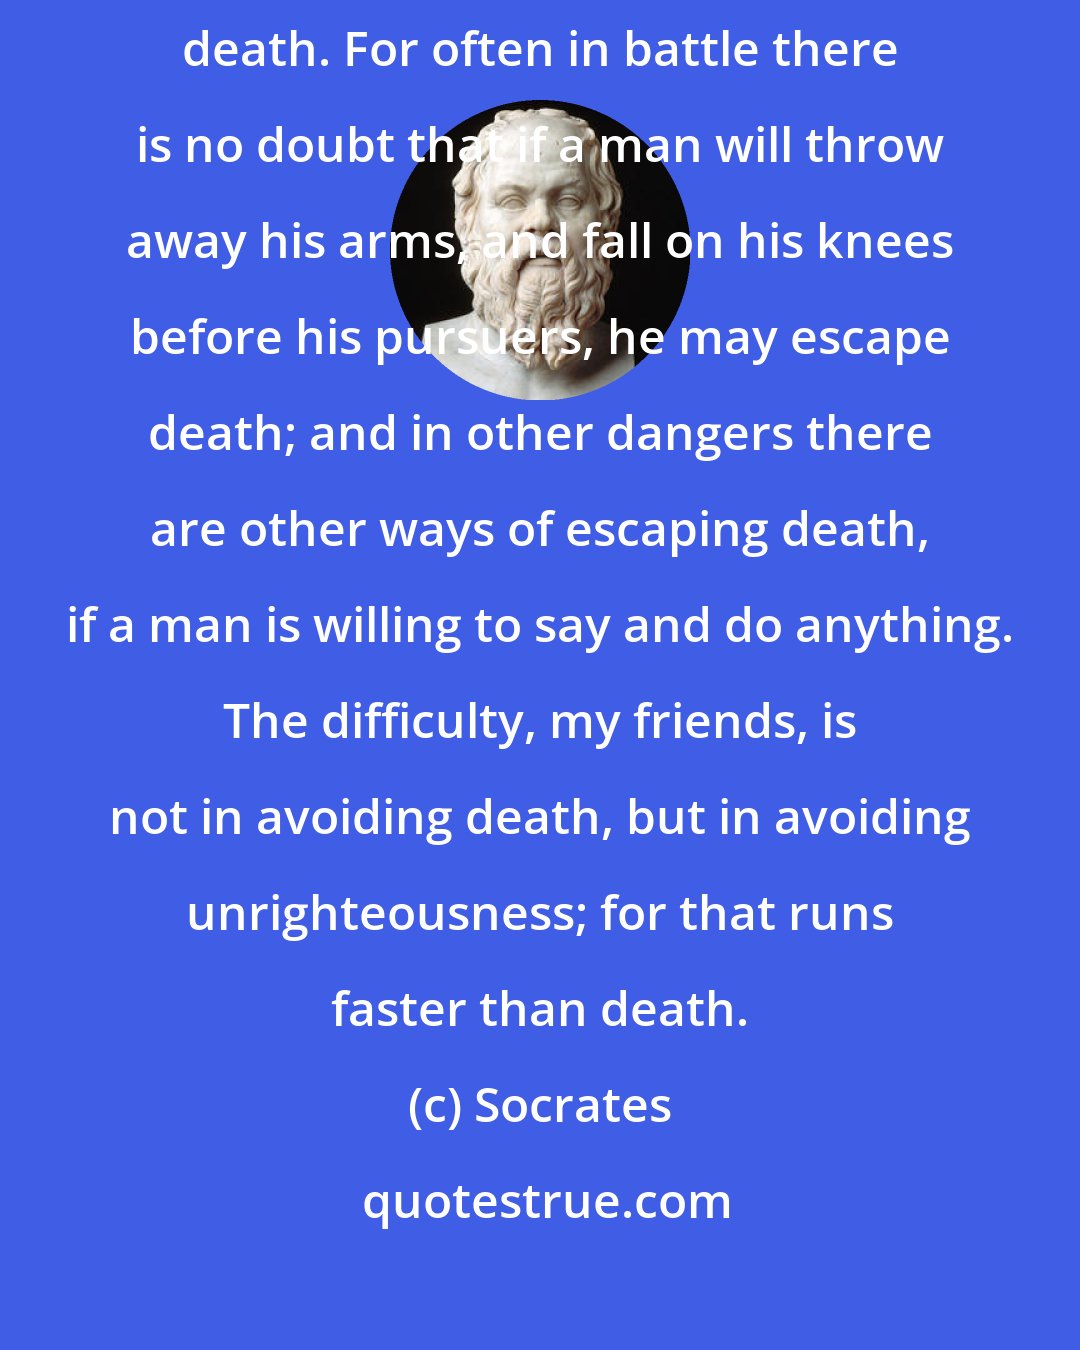 Socrates: [N]either in war nor yet at law ought any man to use every way of escaping death. For often in battle there is no doubt that if a man will throw away his arms, and fall on his knees before his pursuers, he may escape death; and in other dangers there are other ways of escaping death, if a man is willing to say and do anything. The difficulty, my friends, is not in avoiding death, but in avoiding unrighteousness; for that runs faster than death.